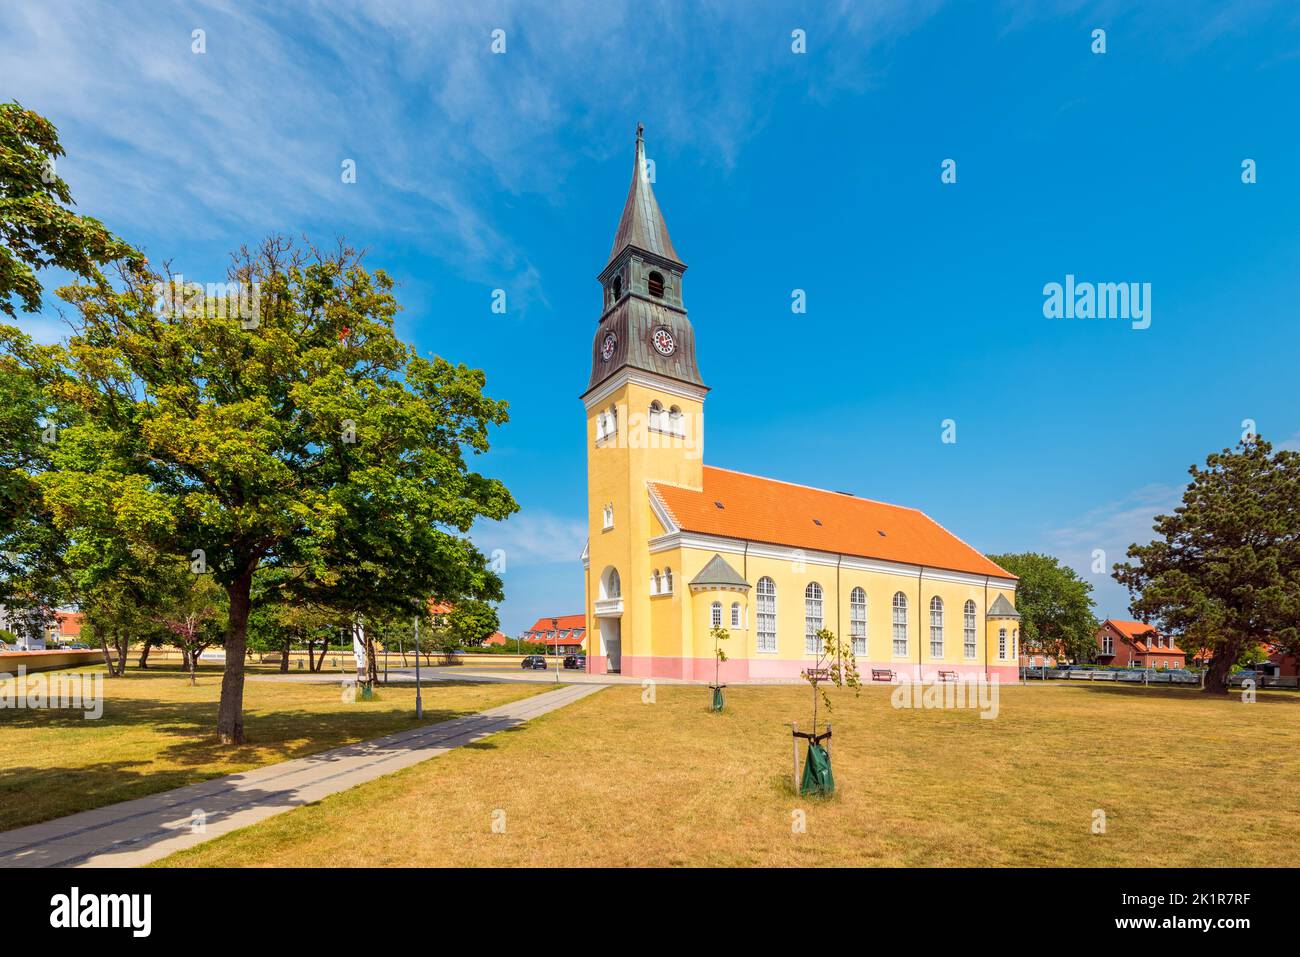 Church in Skagen, Jutland, Denmark on summer day. The church was completed in 1841. Stock Photo